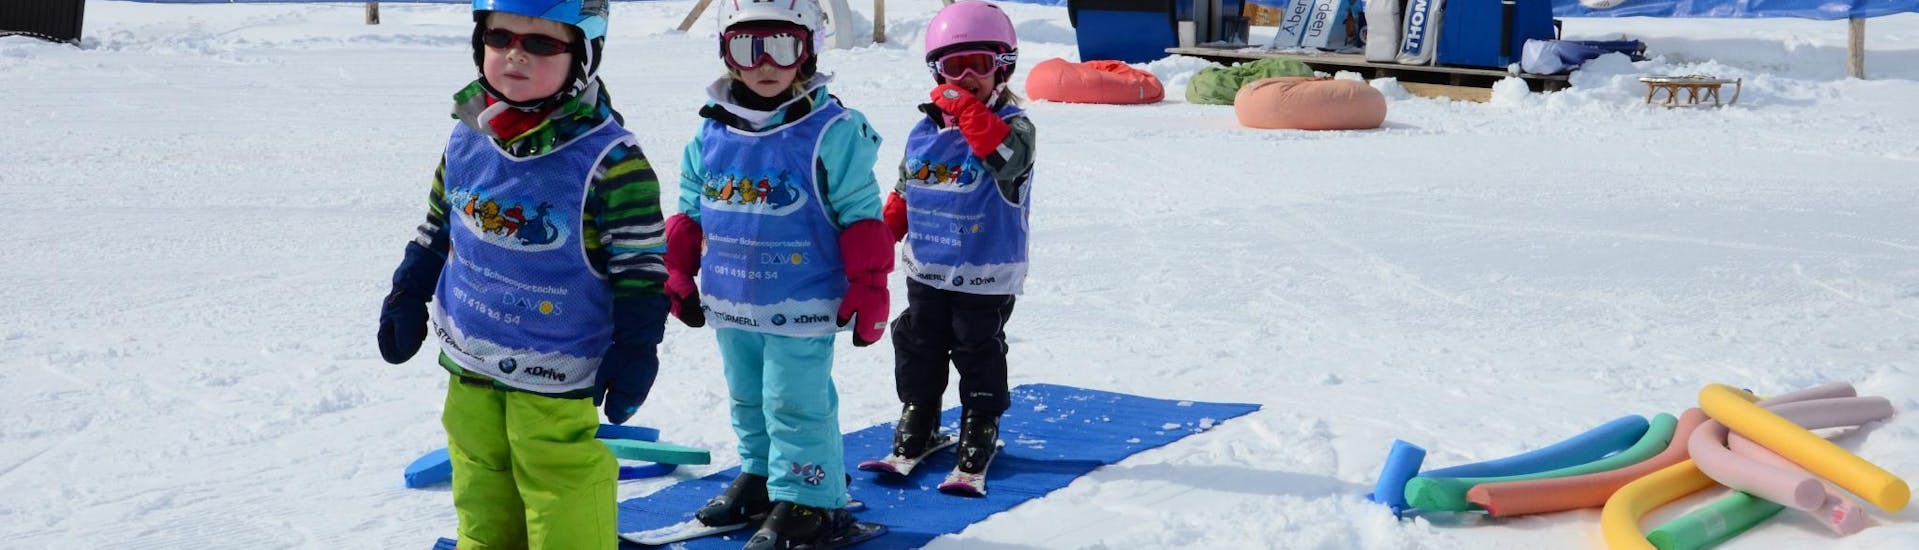 Kids Ski Lessons &quot;Bolgen&quot; (8-12 y.) for Advanced Skiers with Swiss Ski School Davos - Hero image